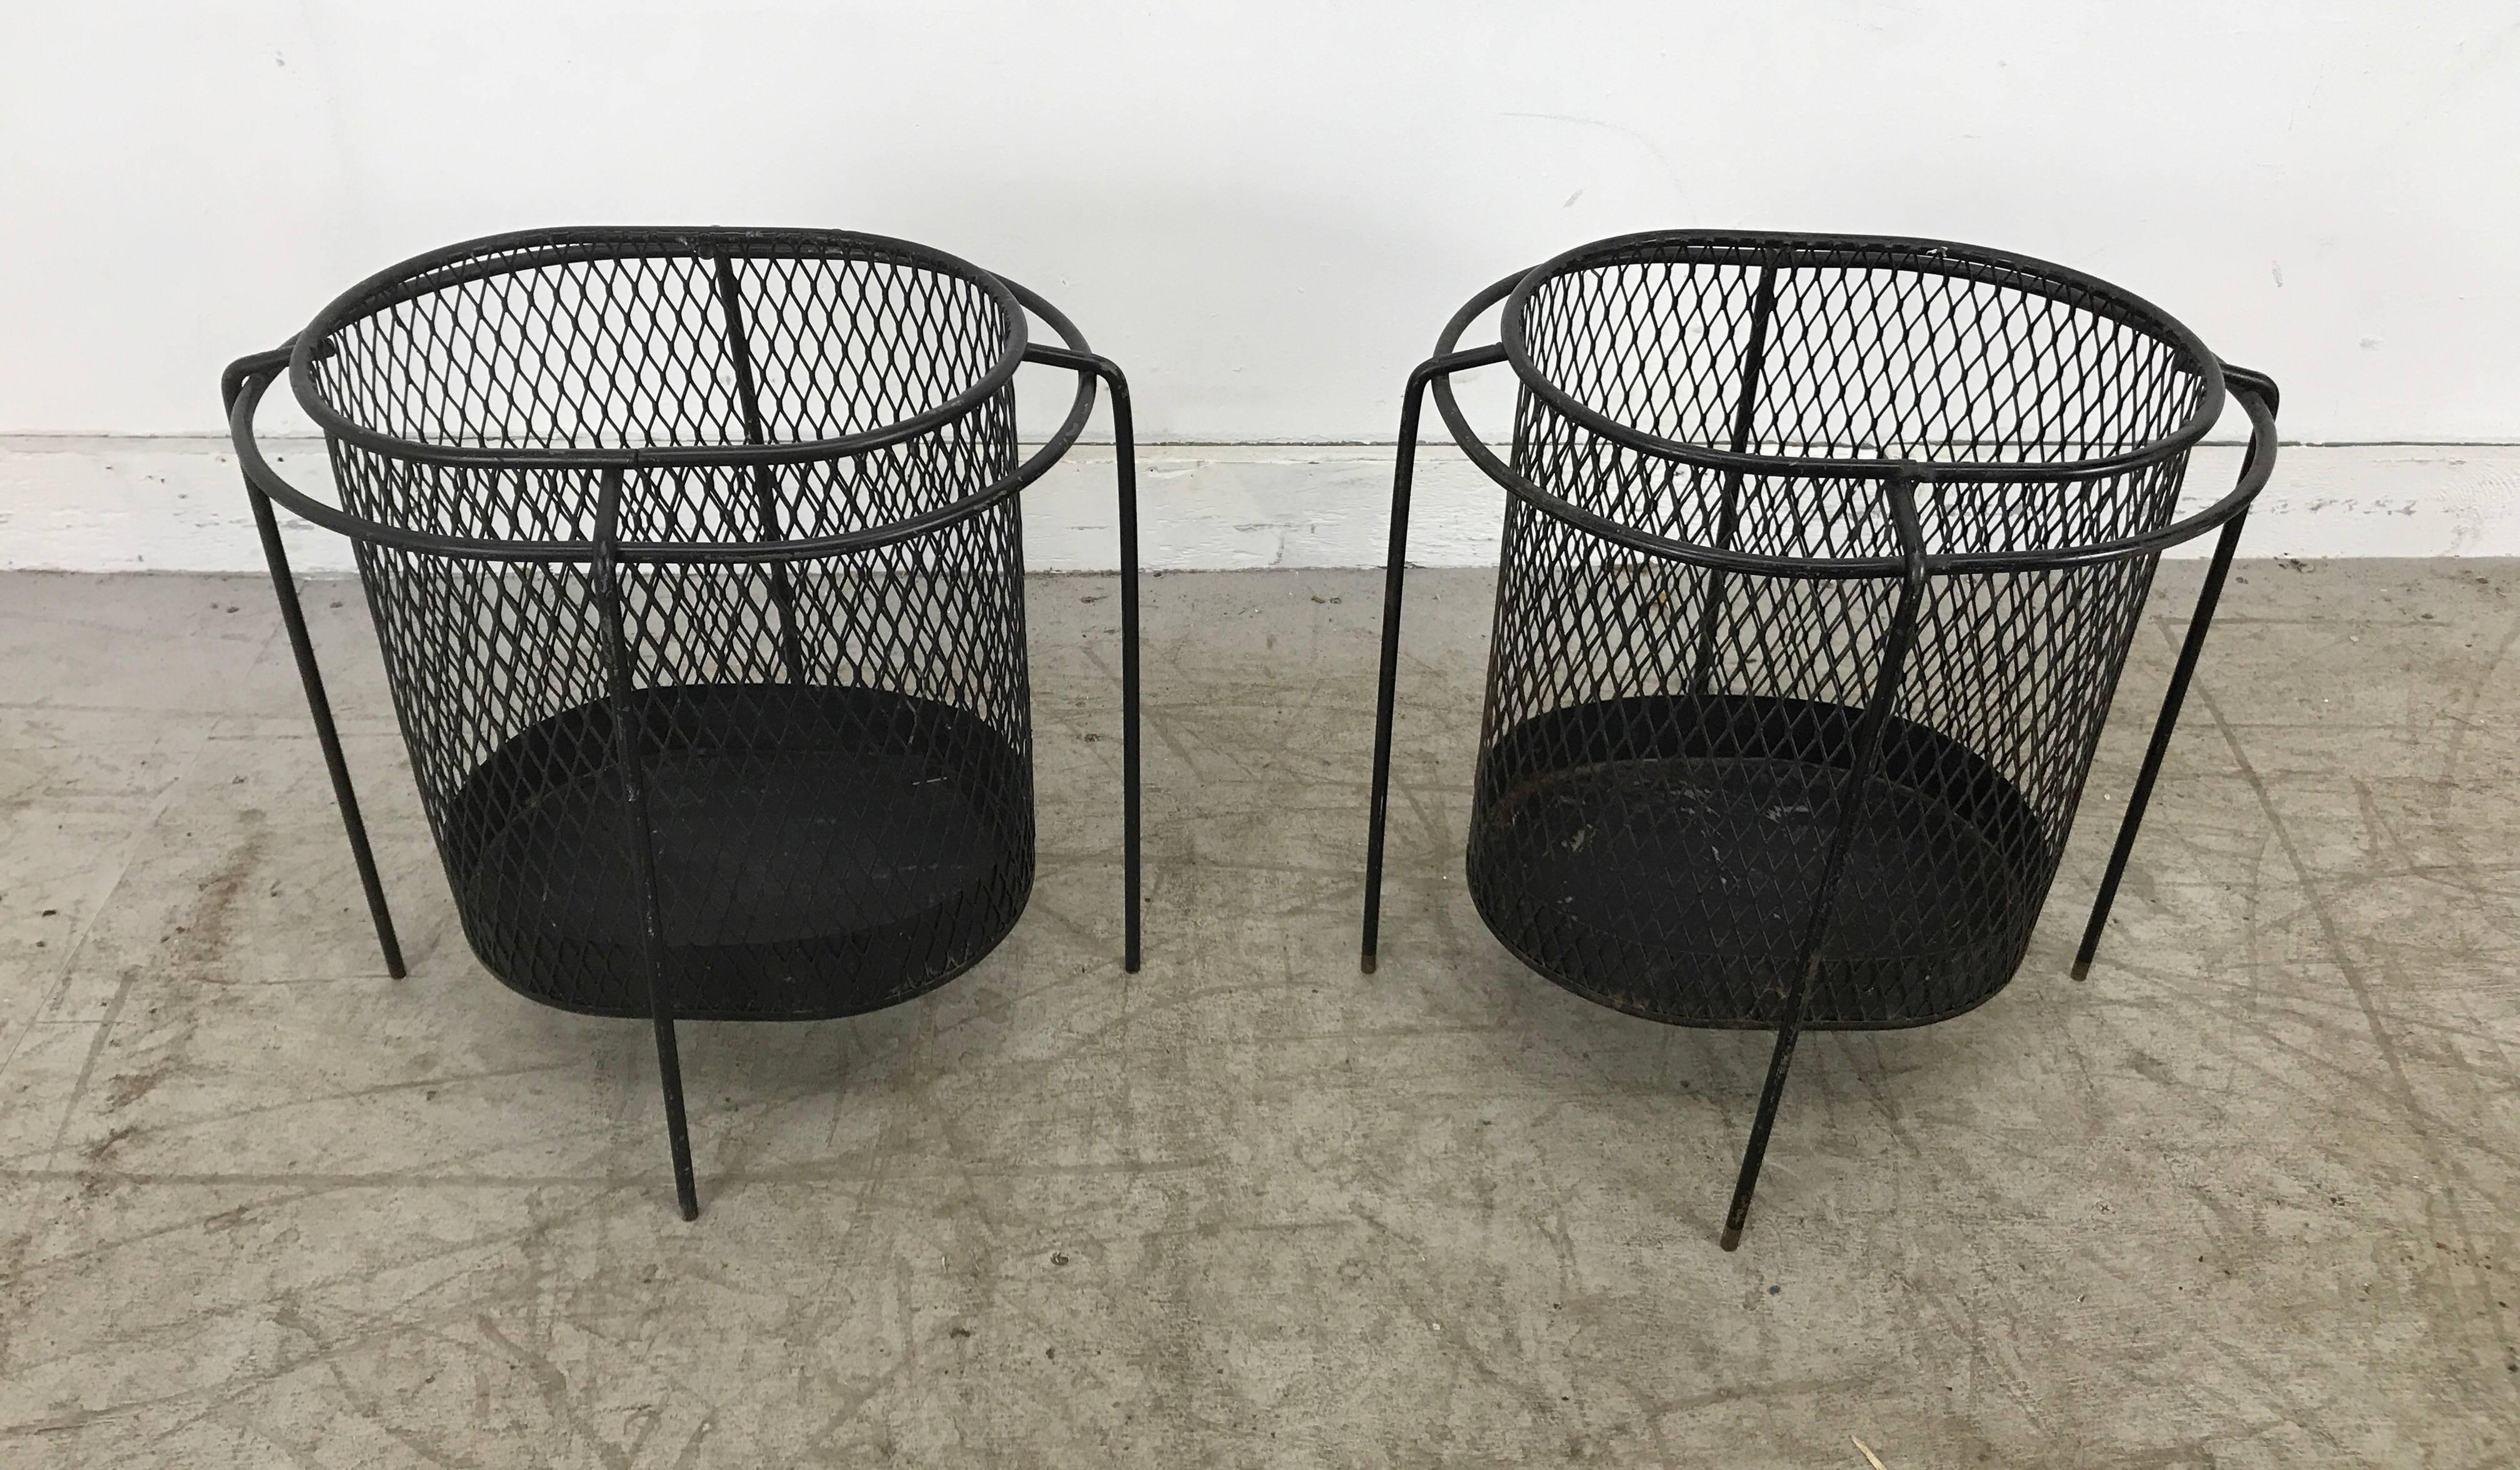 Matched pair of stylized Mid-Century Modern waste baskets /catch-all, wonderful design, spider like wire iron and iron mesh.